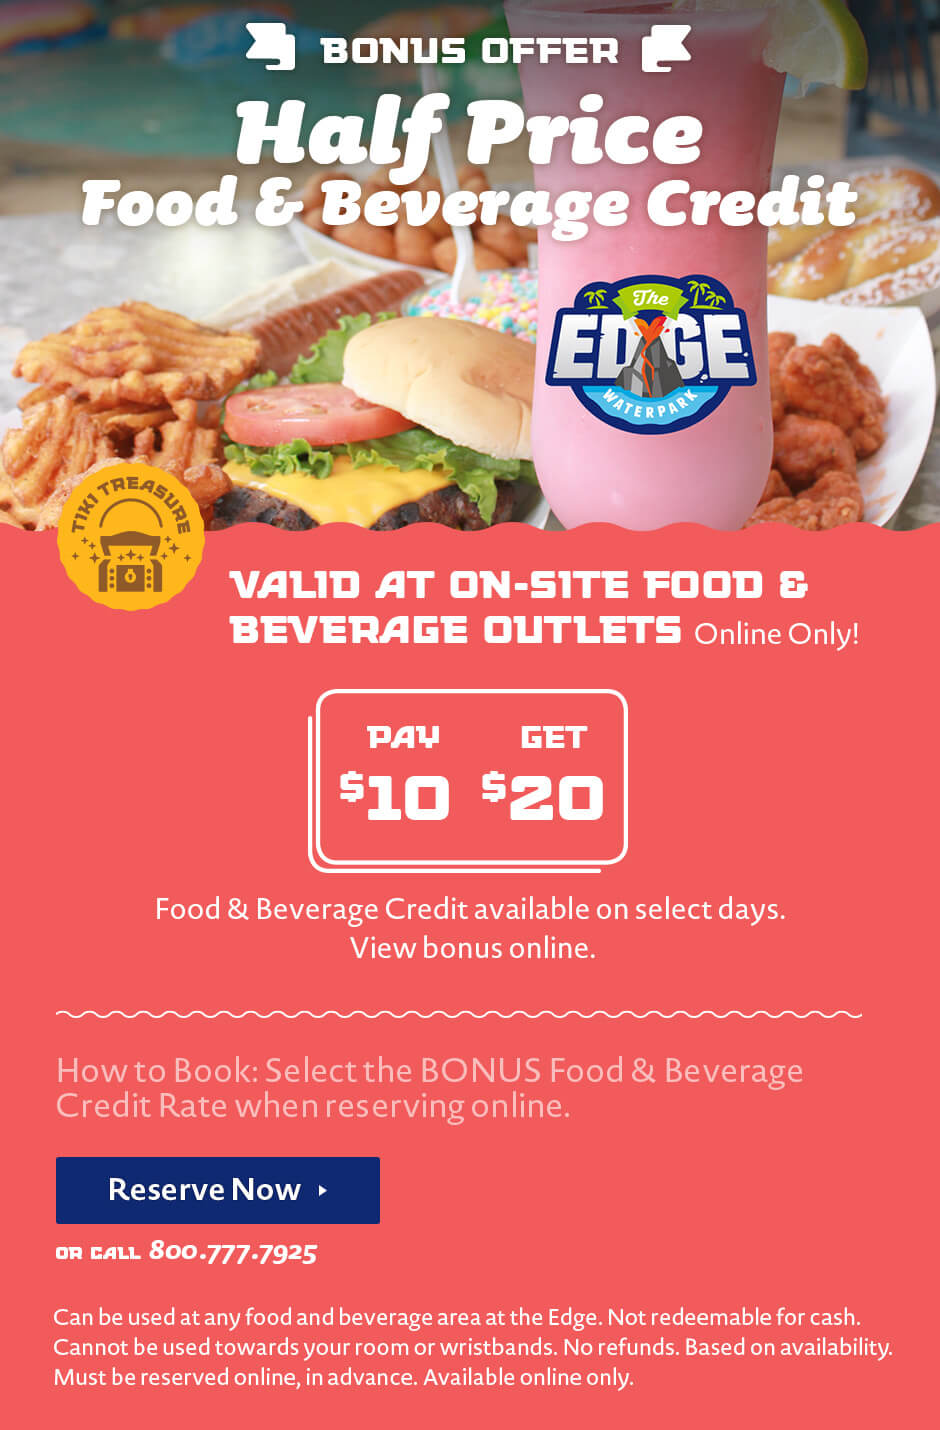 Discounted food and beverage packages